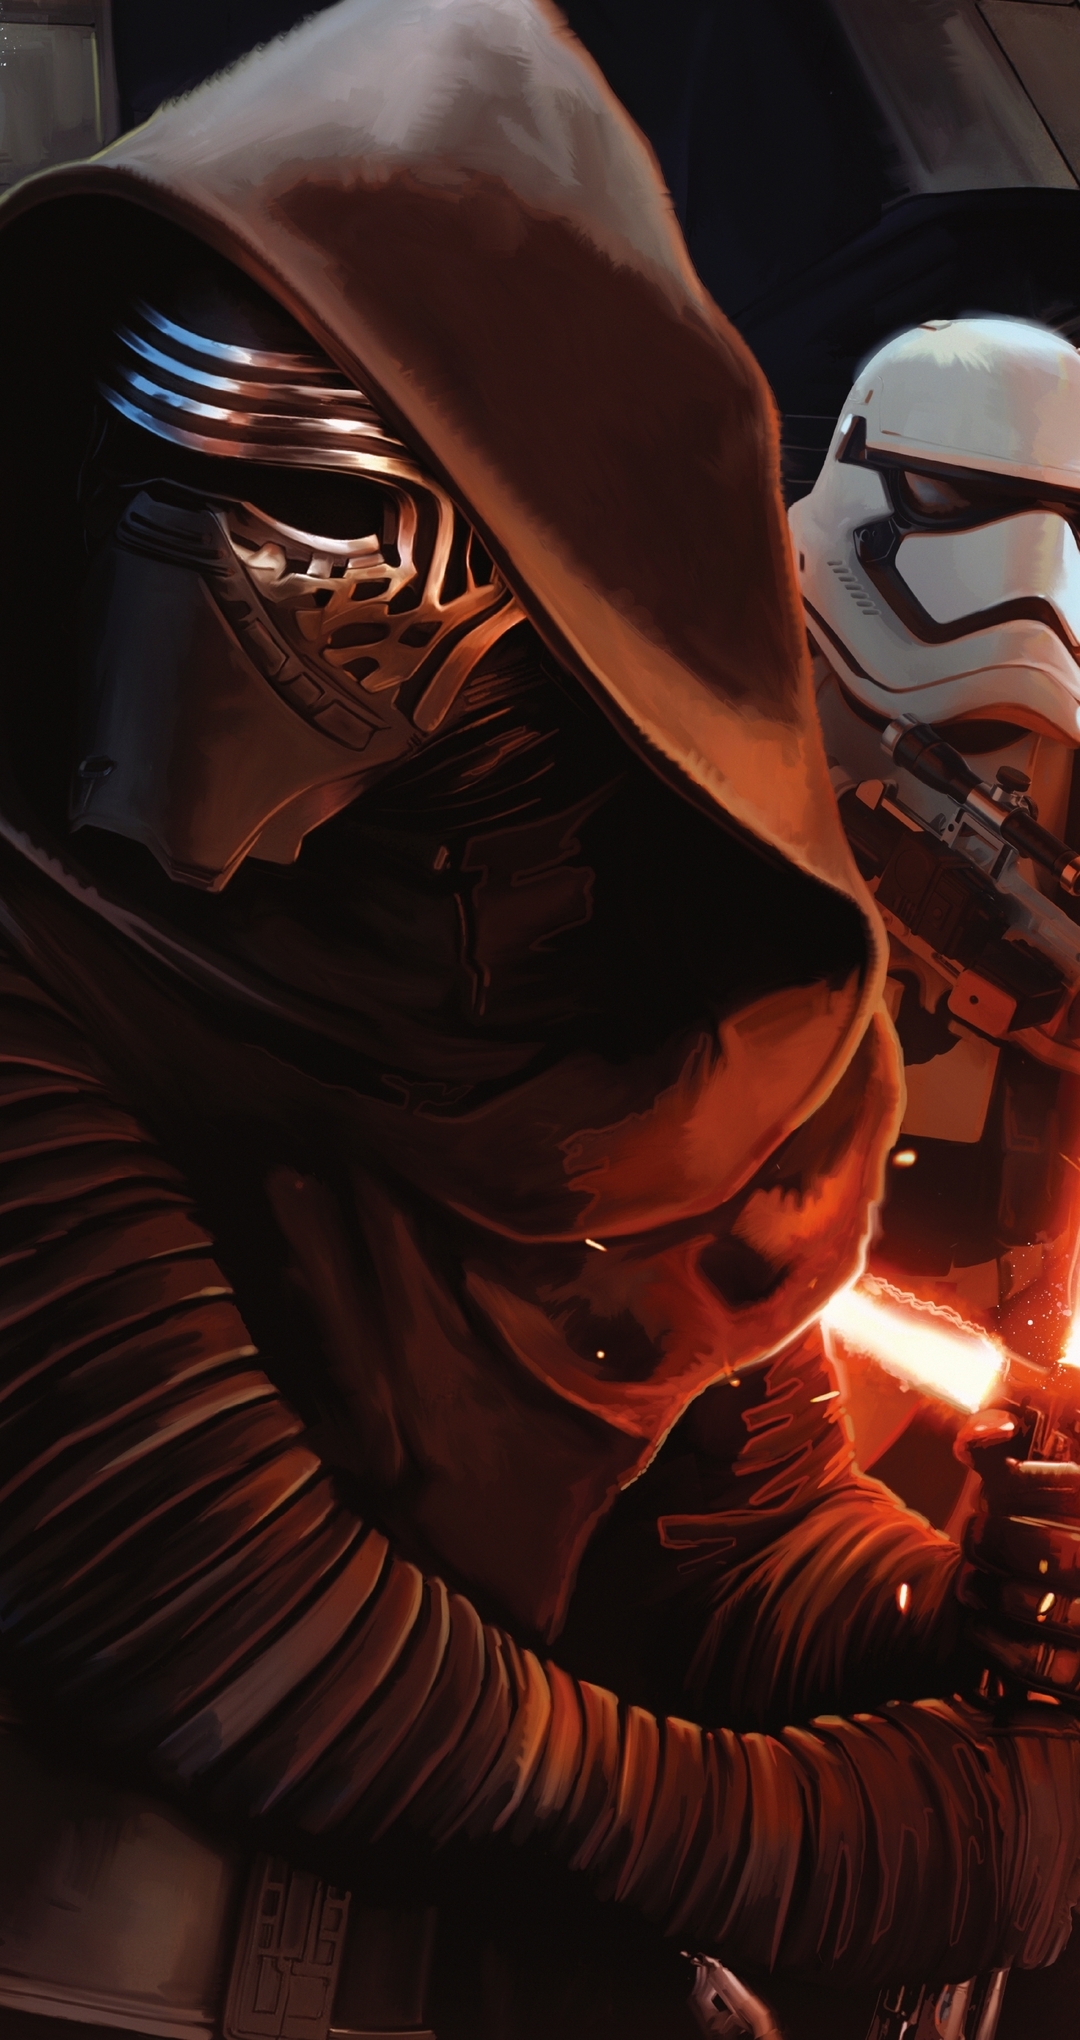 Image: Star Wars: The Force Awakens, Kylo Ren, mask, soldiers, sword, weapon